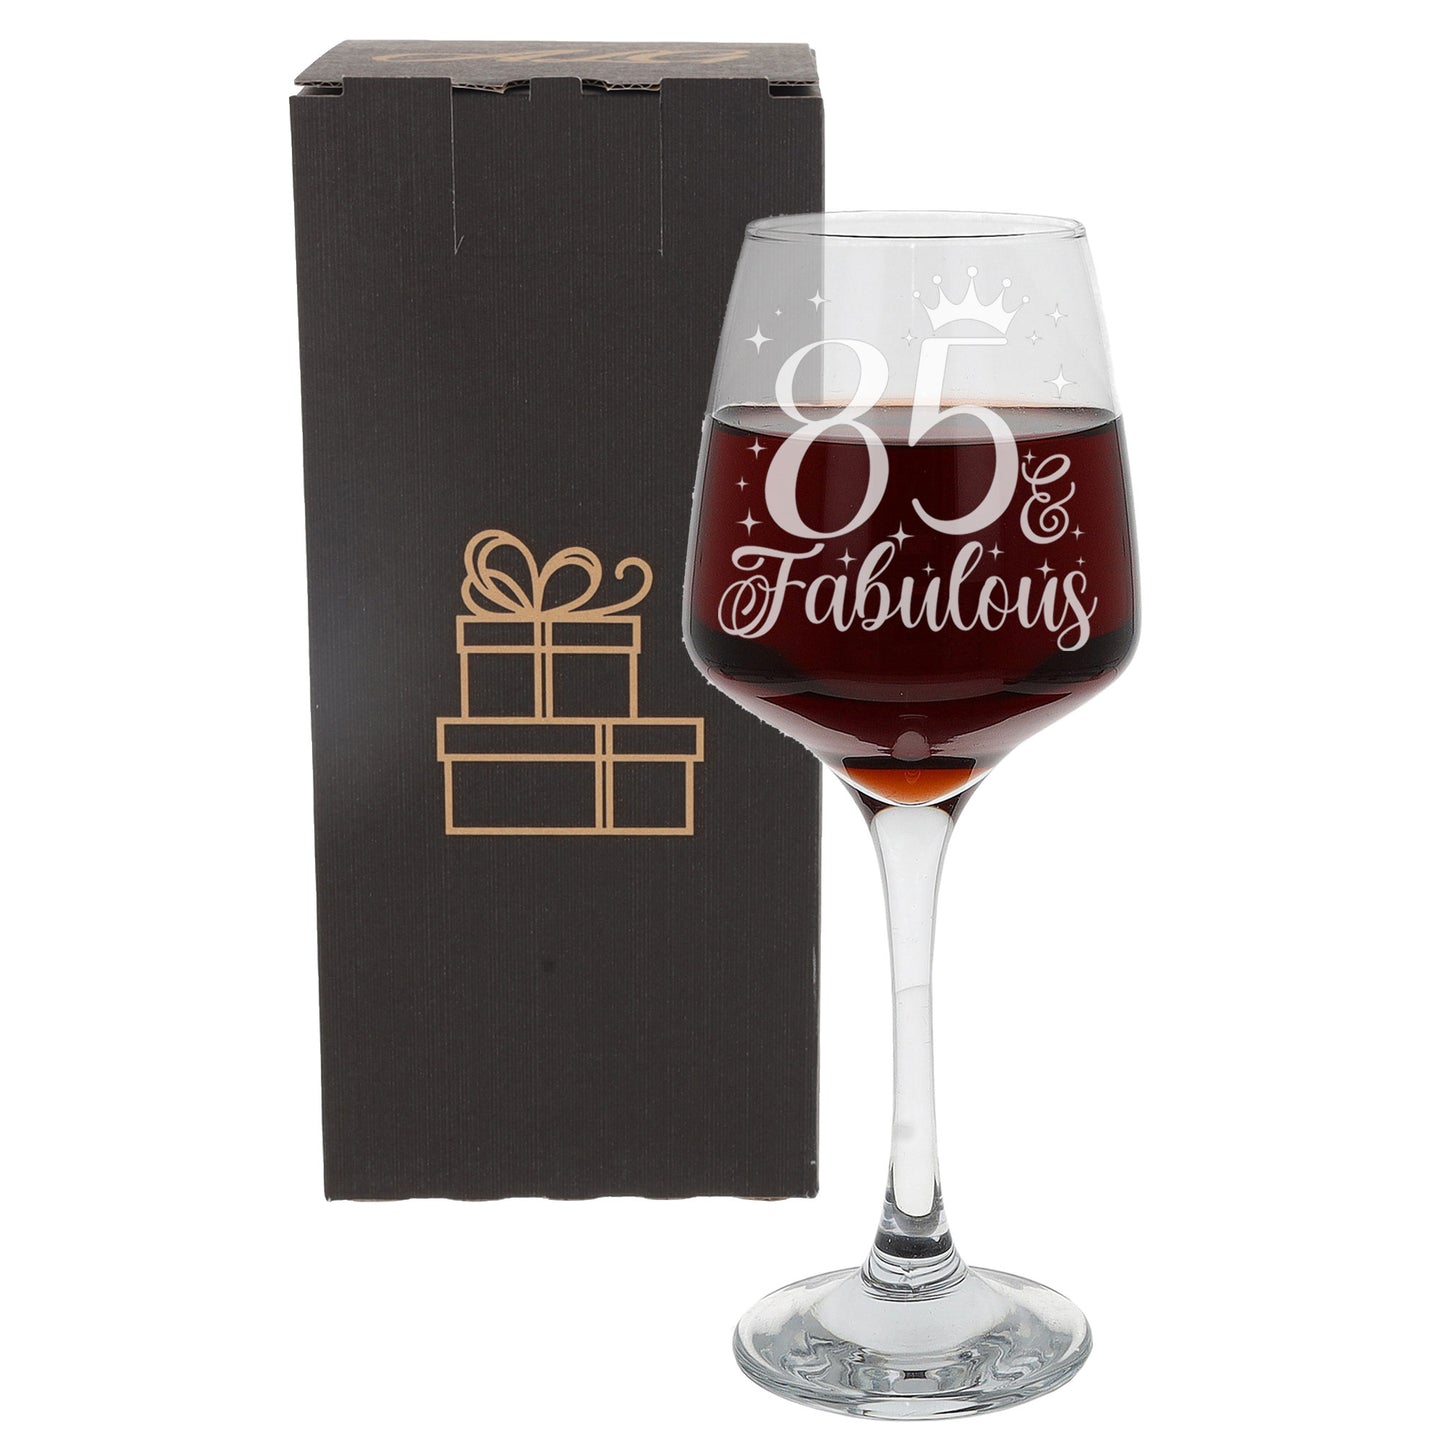 85 & Fabulous 85th Birthday Gift Engraved Wine Glass and/or Coaster Set  - Always Looking Good -   